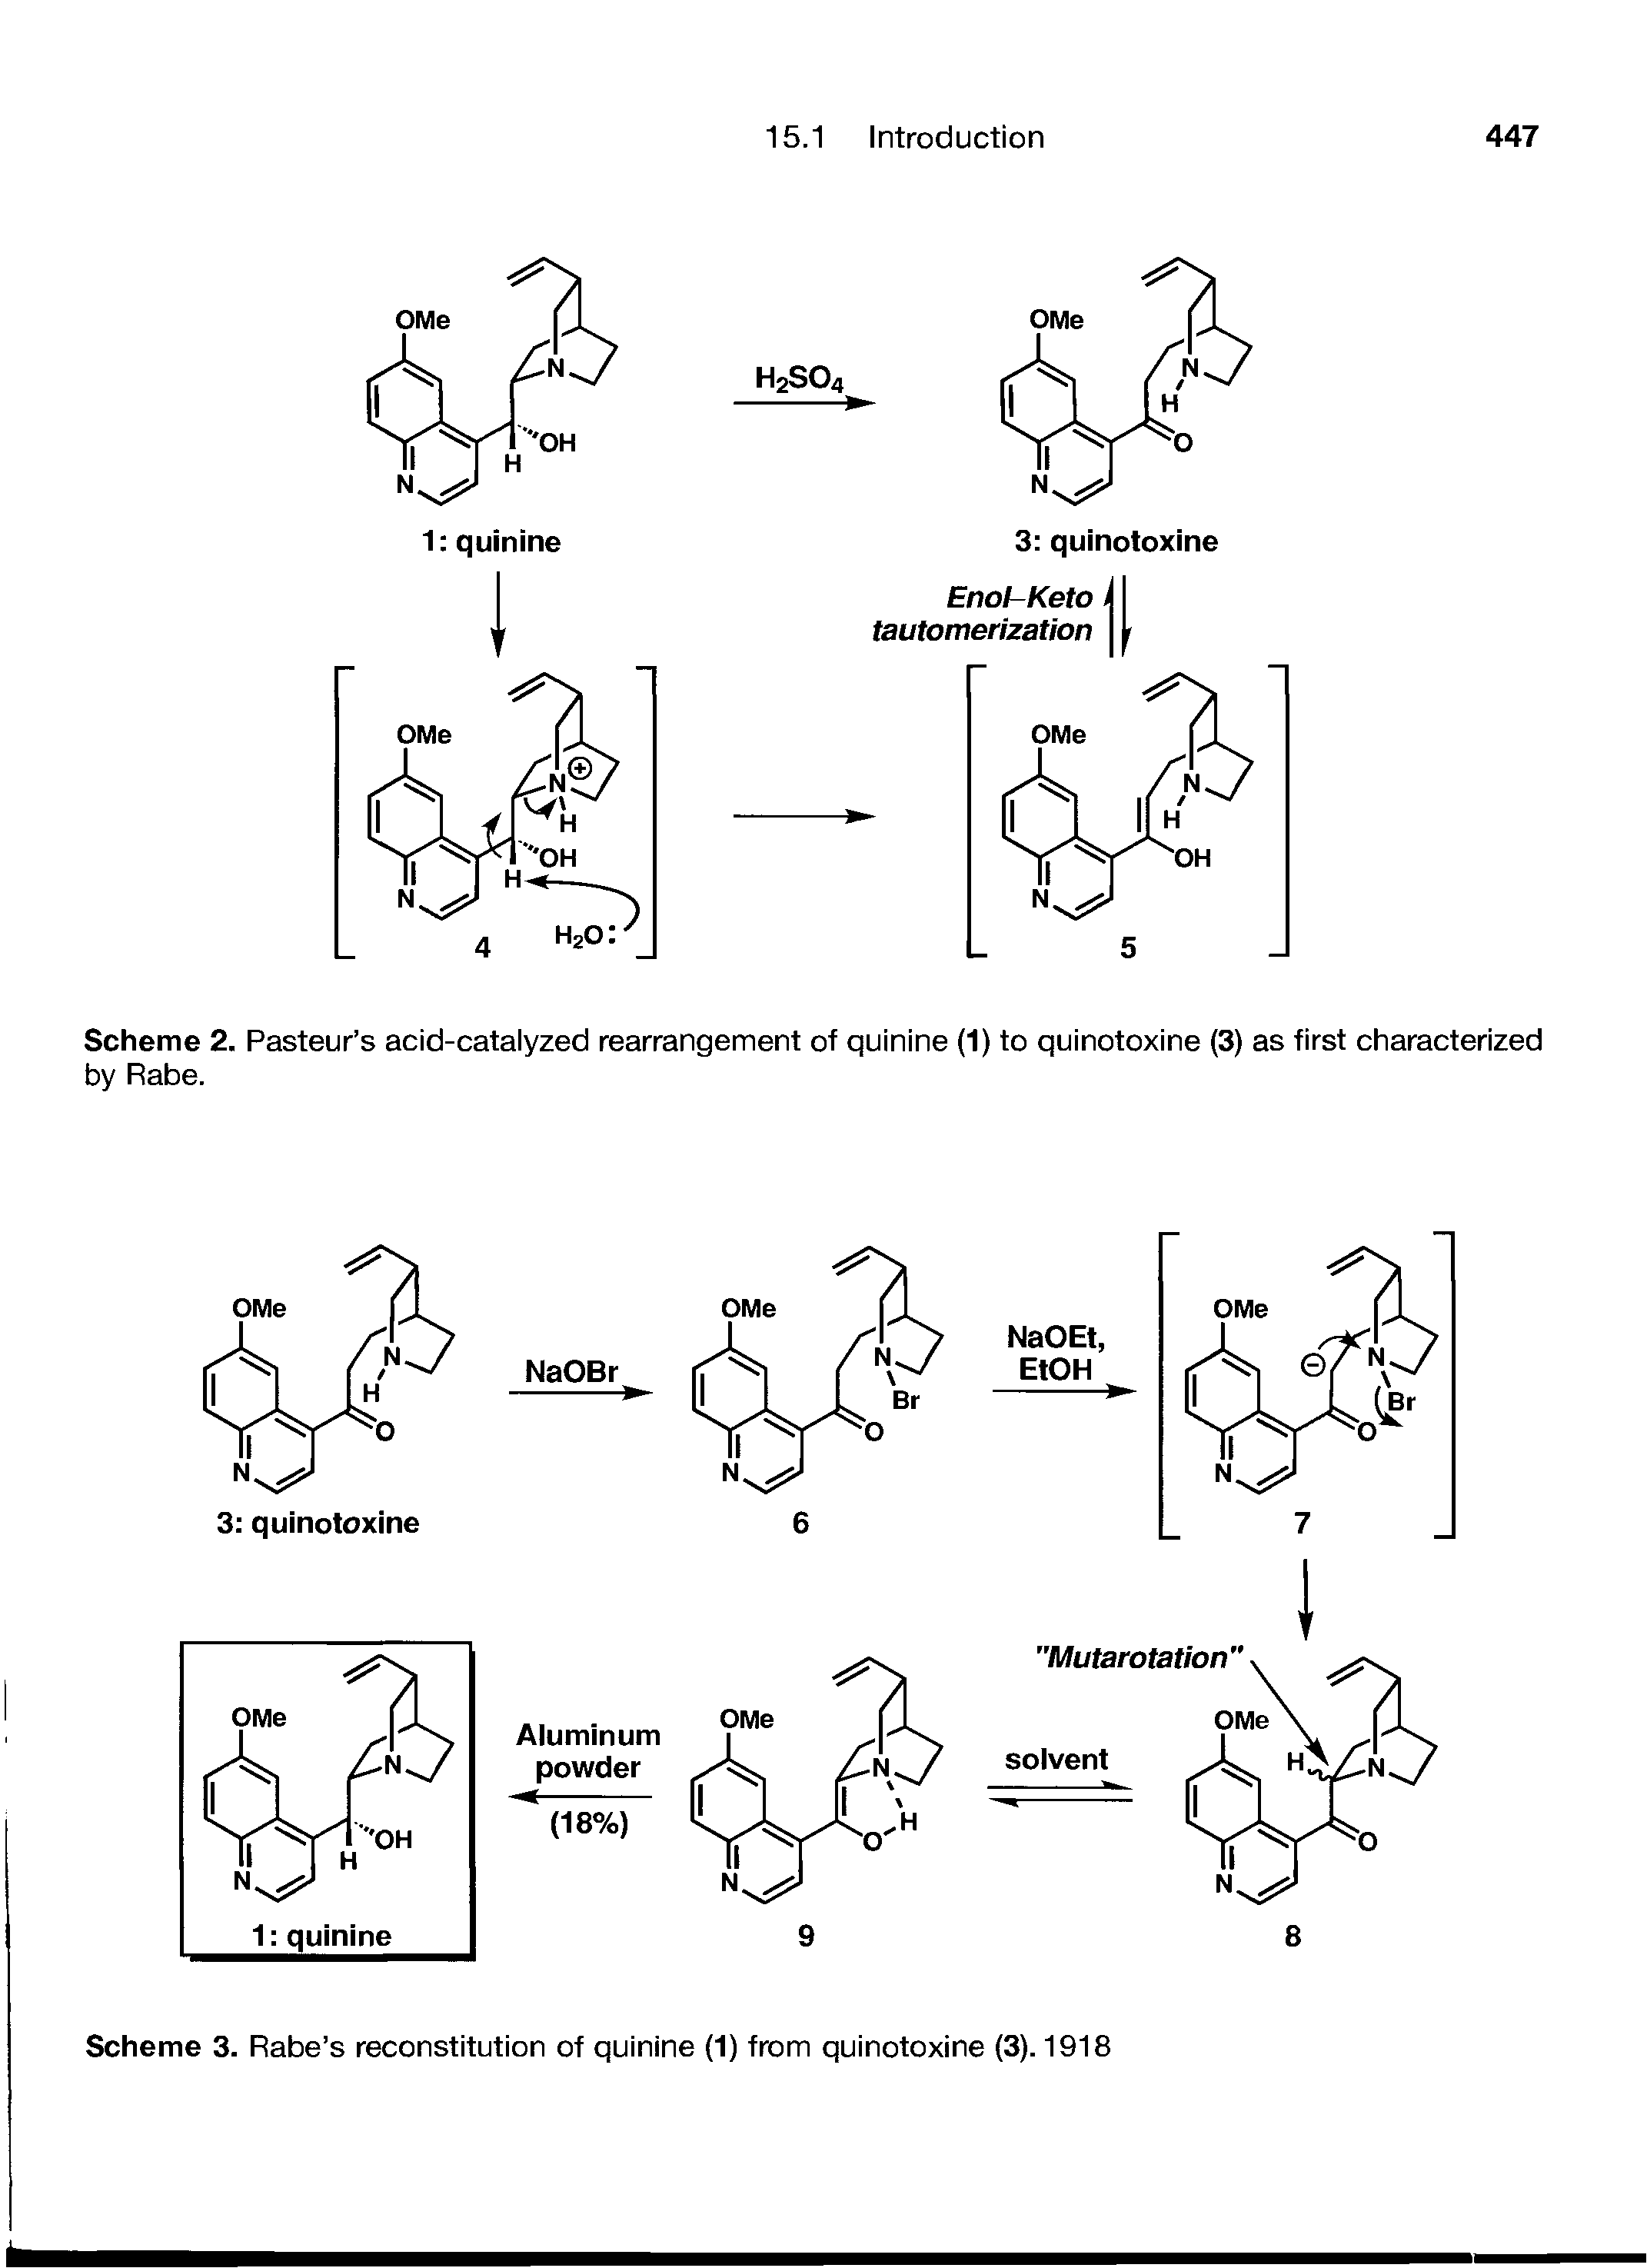 Scheme 2. Pasteur s acid-catalyzed rearrangement of quinine (1) to quinotoxine (3) as first characterized by Rabe.